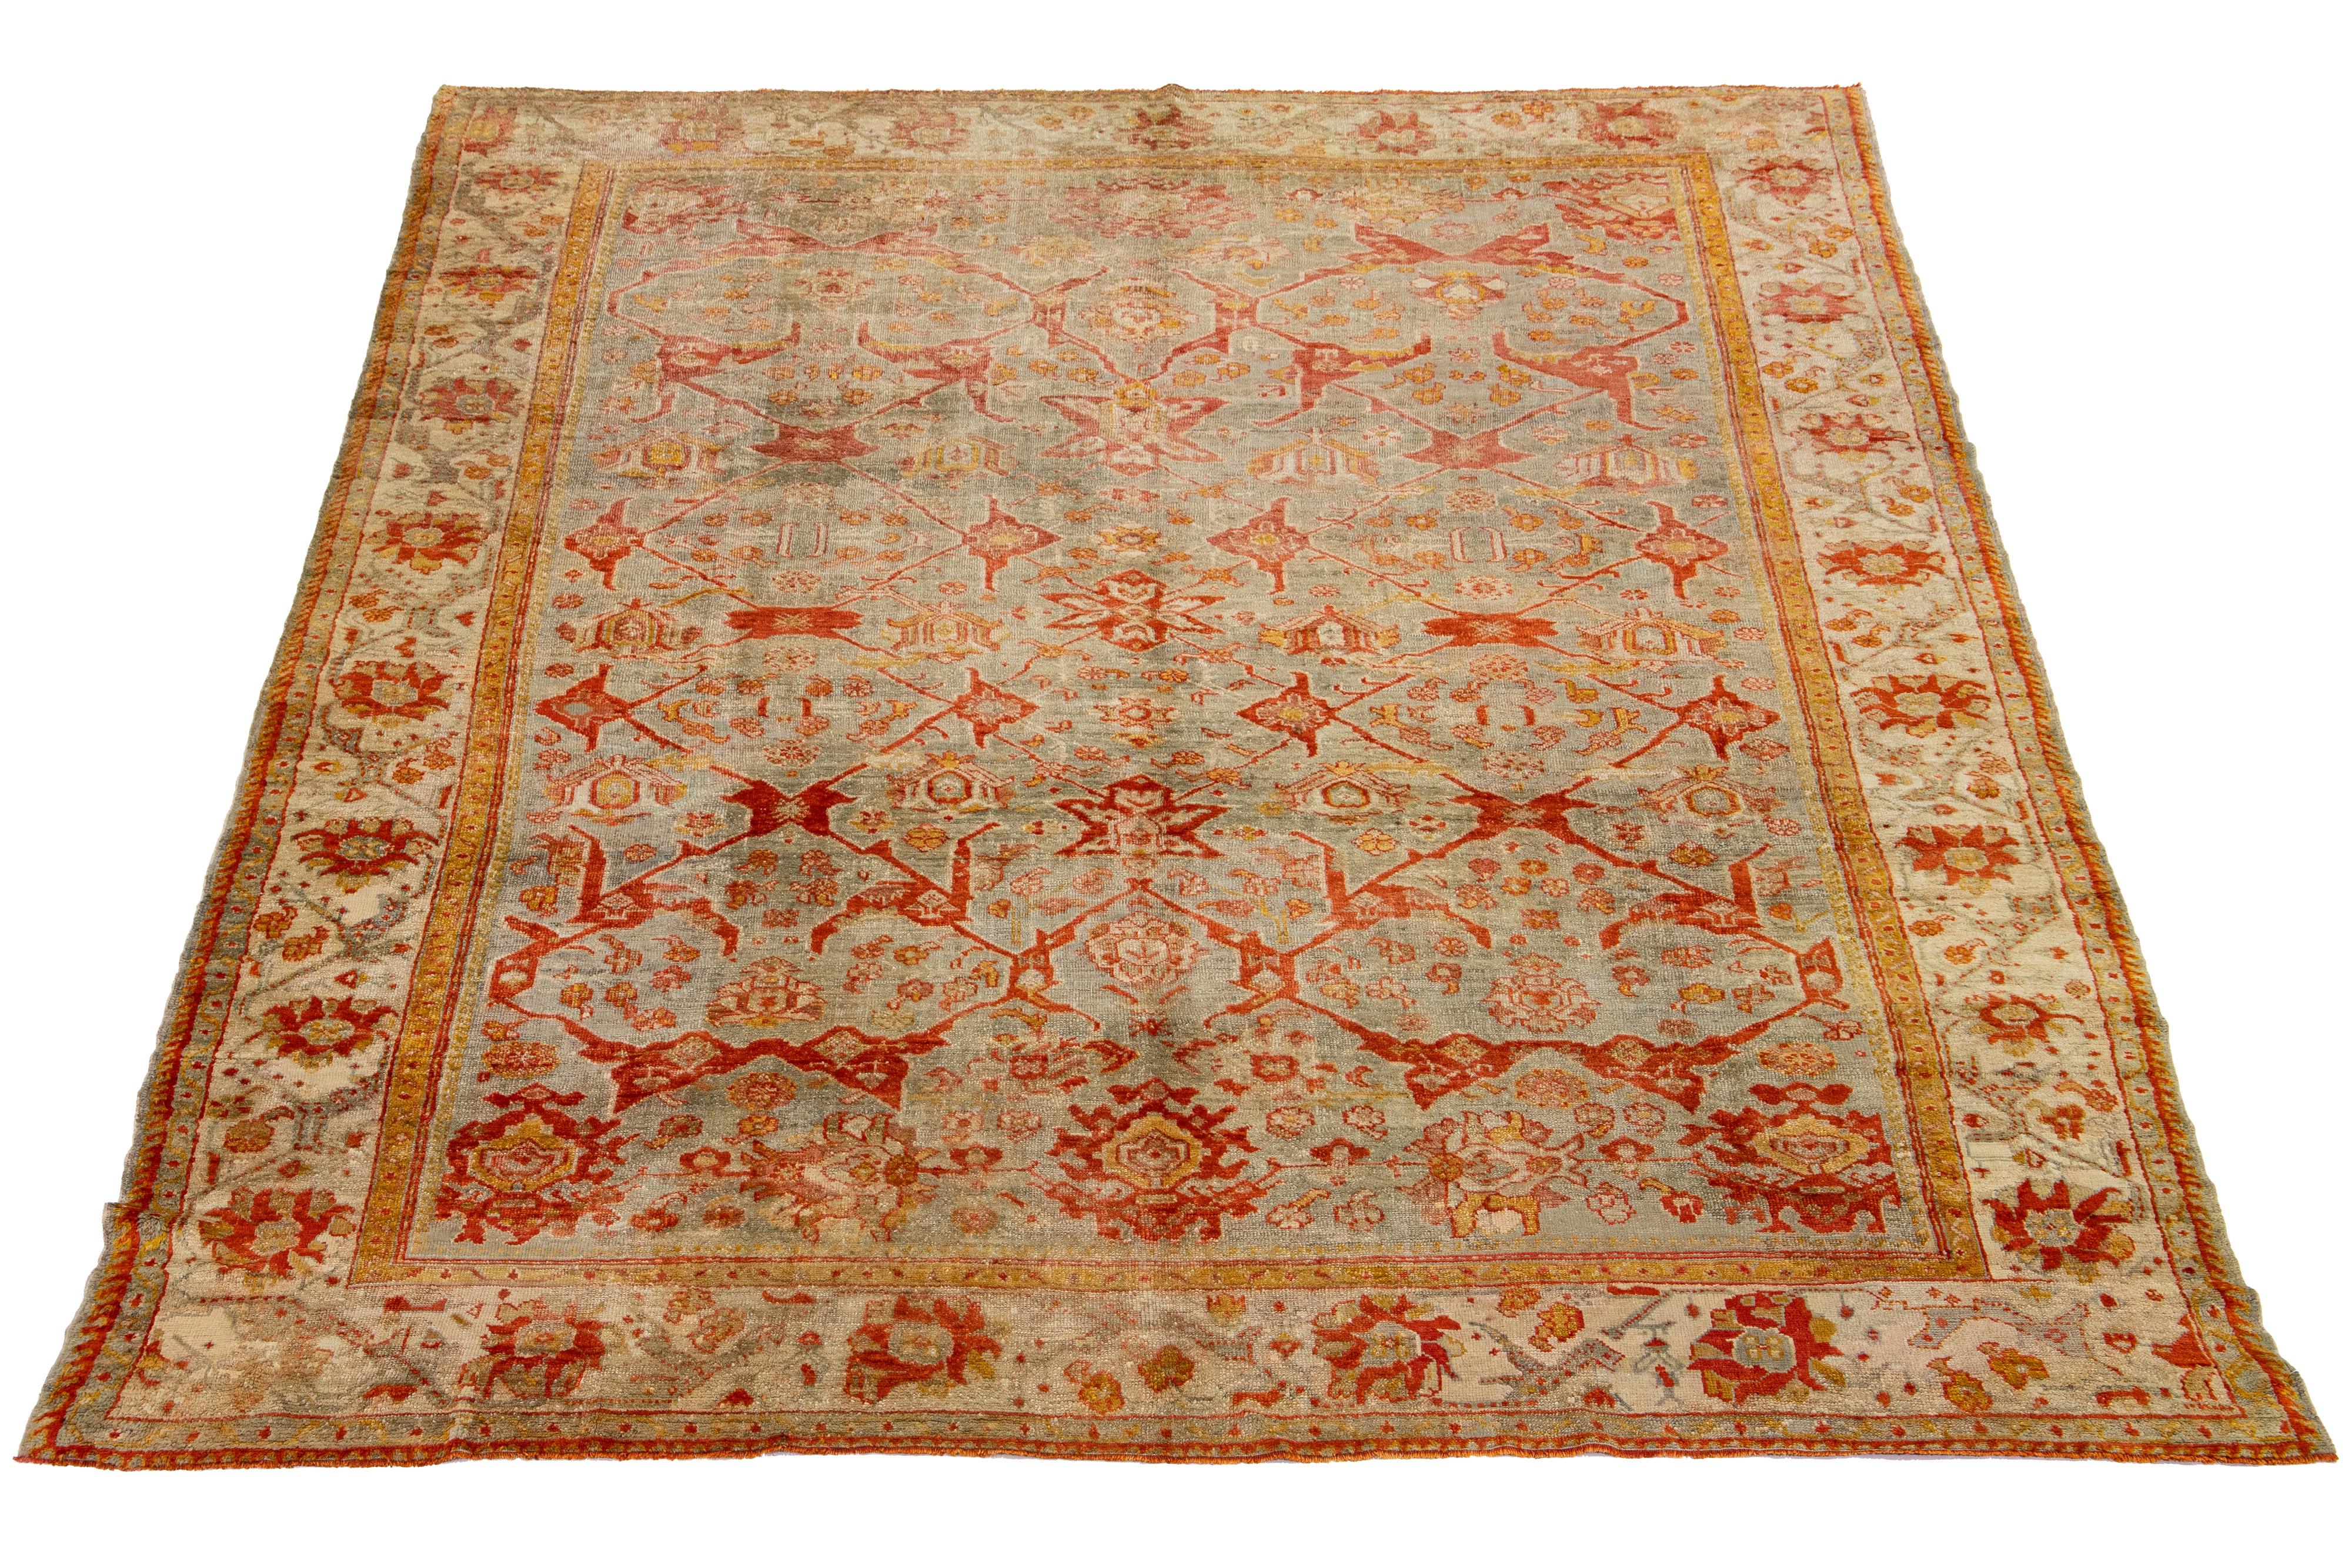 This Turkish Oushak rug is truly one-of-a-kind! Hand-knotted with soft wool, it boasts a stunning gray color field that perfectly complements its striking all-over floral design. With its eye-catching orange-rust and goldenrod accents.

This rug